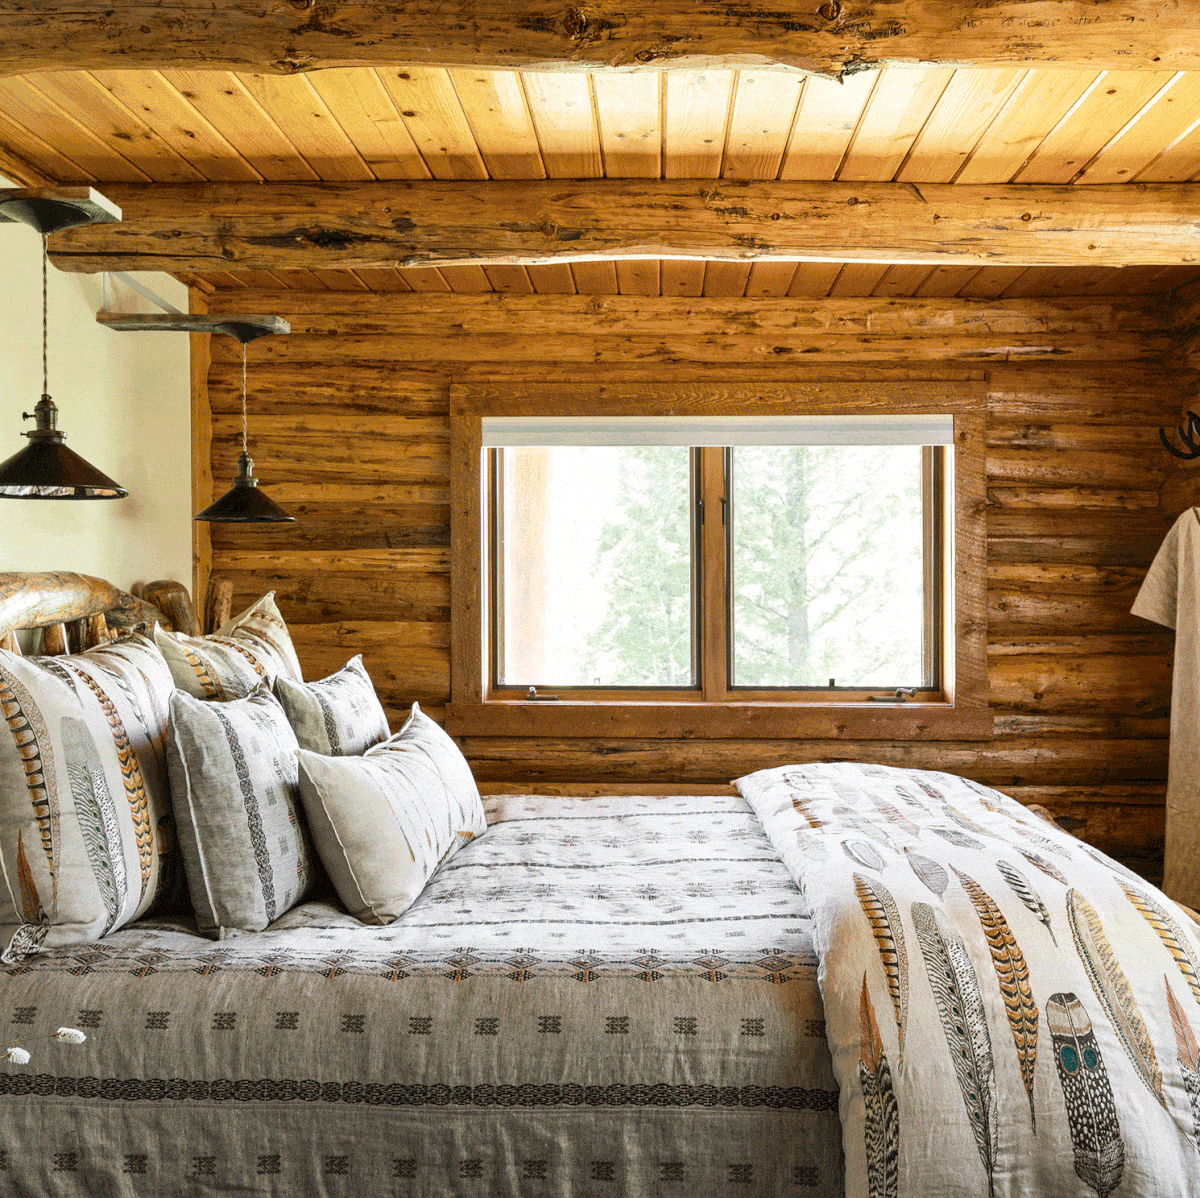 https://hips.hearstapps.com/hmg-prod/images/rustic-bedroom-ideas-stephanie-housely-ct-170619-print-007-1615412354.gif?crop=0.668xw:1.00xh;0.0449xw,0.00240xh&resize=1200:*